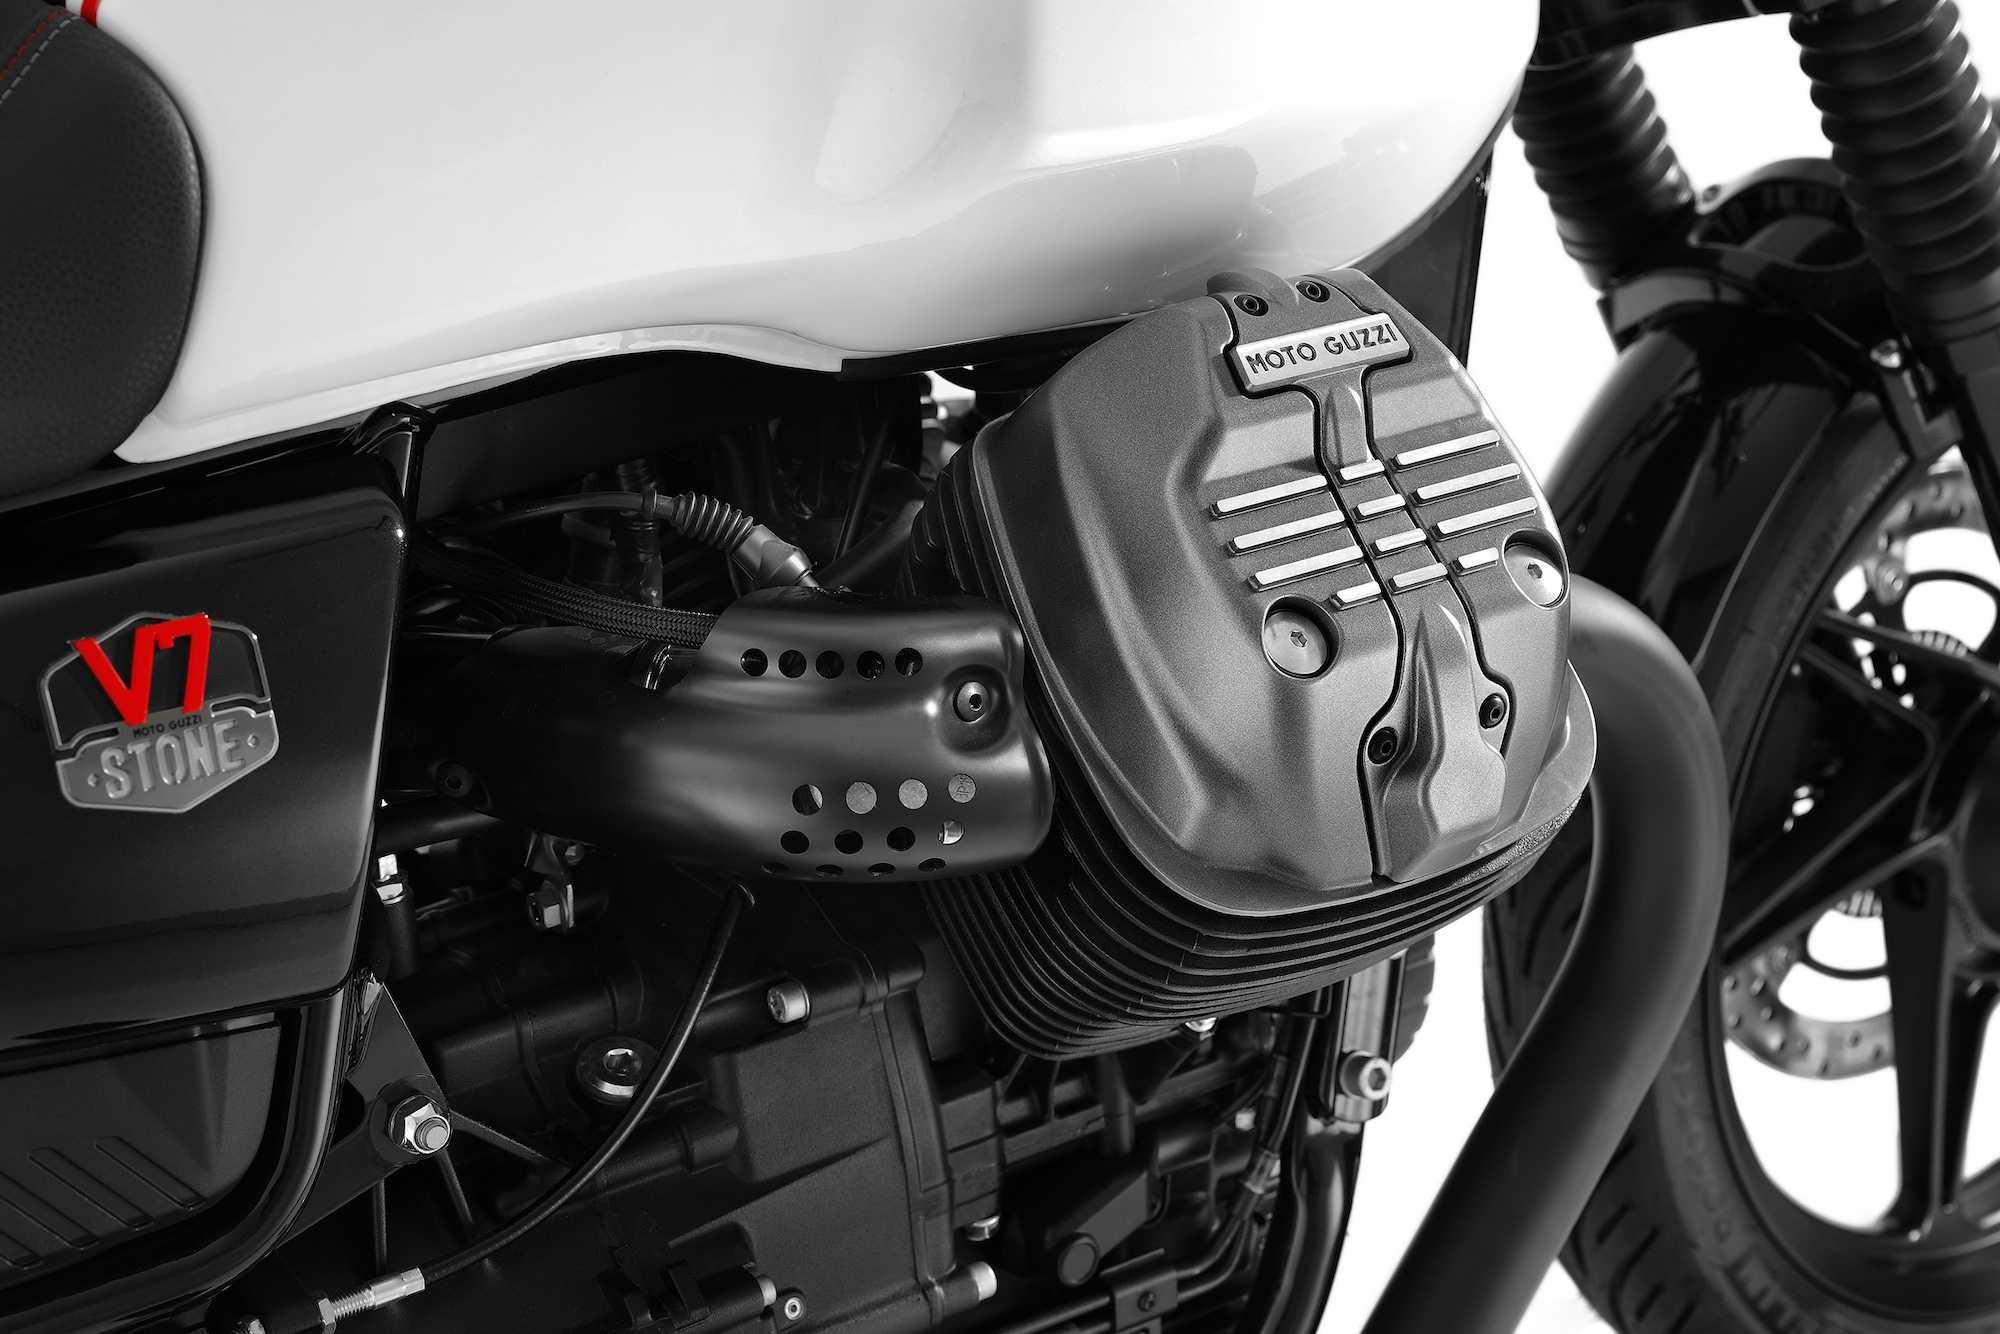 A close-up view of a Moto Guzzi roadster motorcycle.